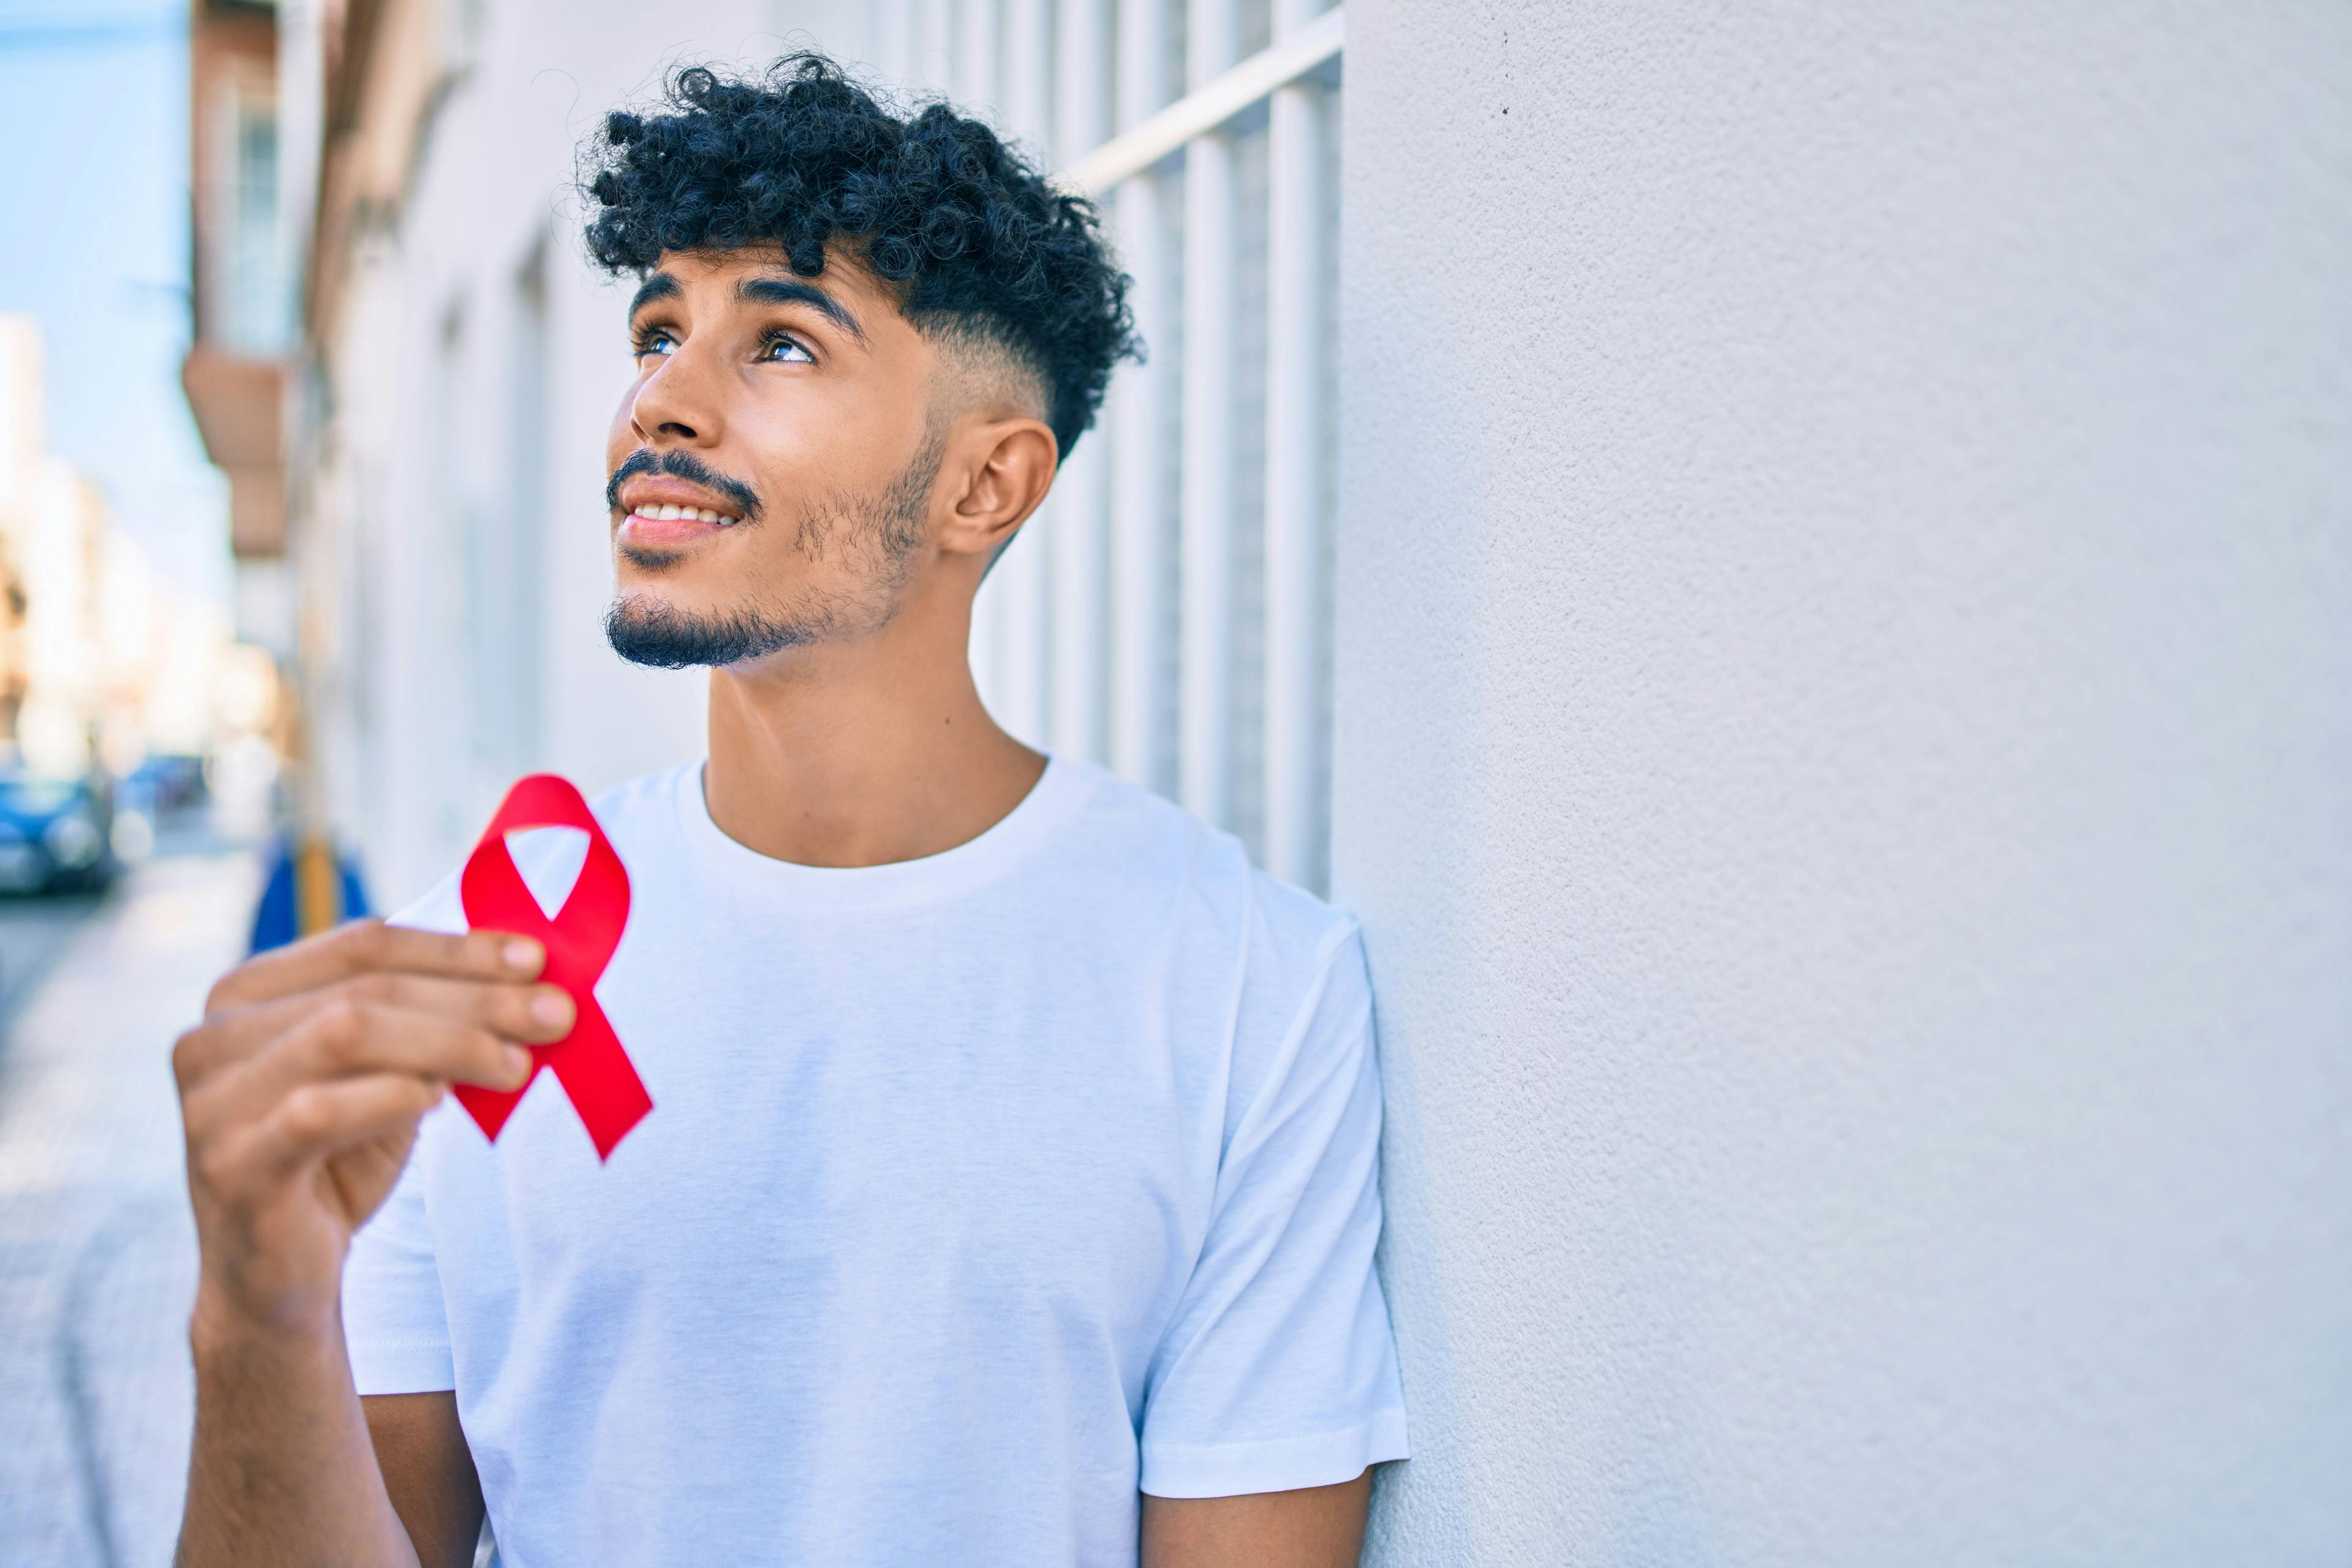 Pharmacists Play Key Role in Educating Patients About HIV Risk, Treatments